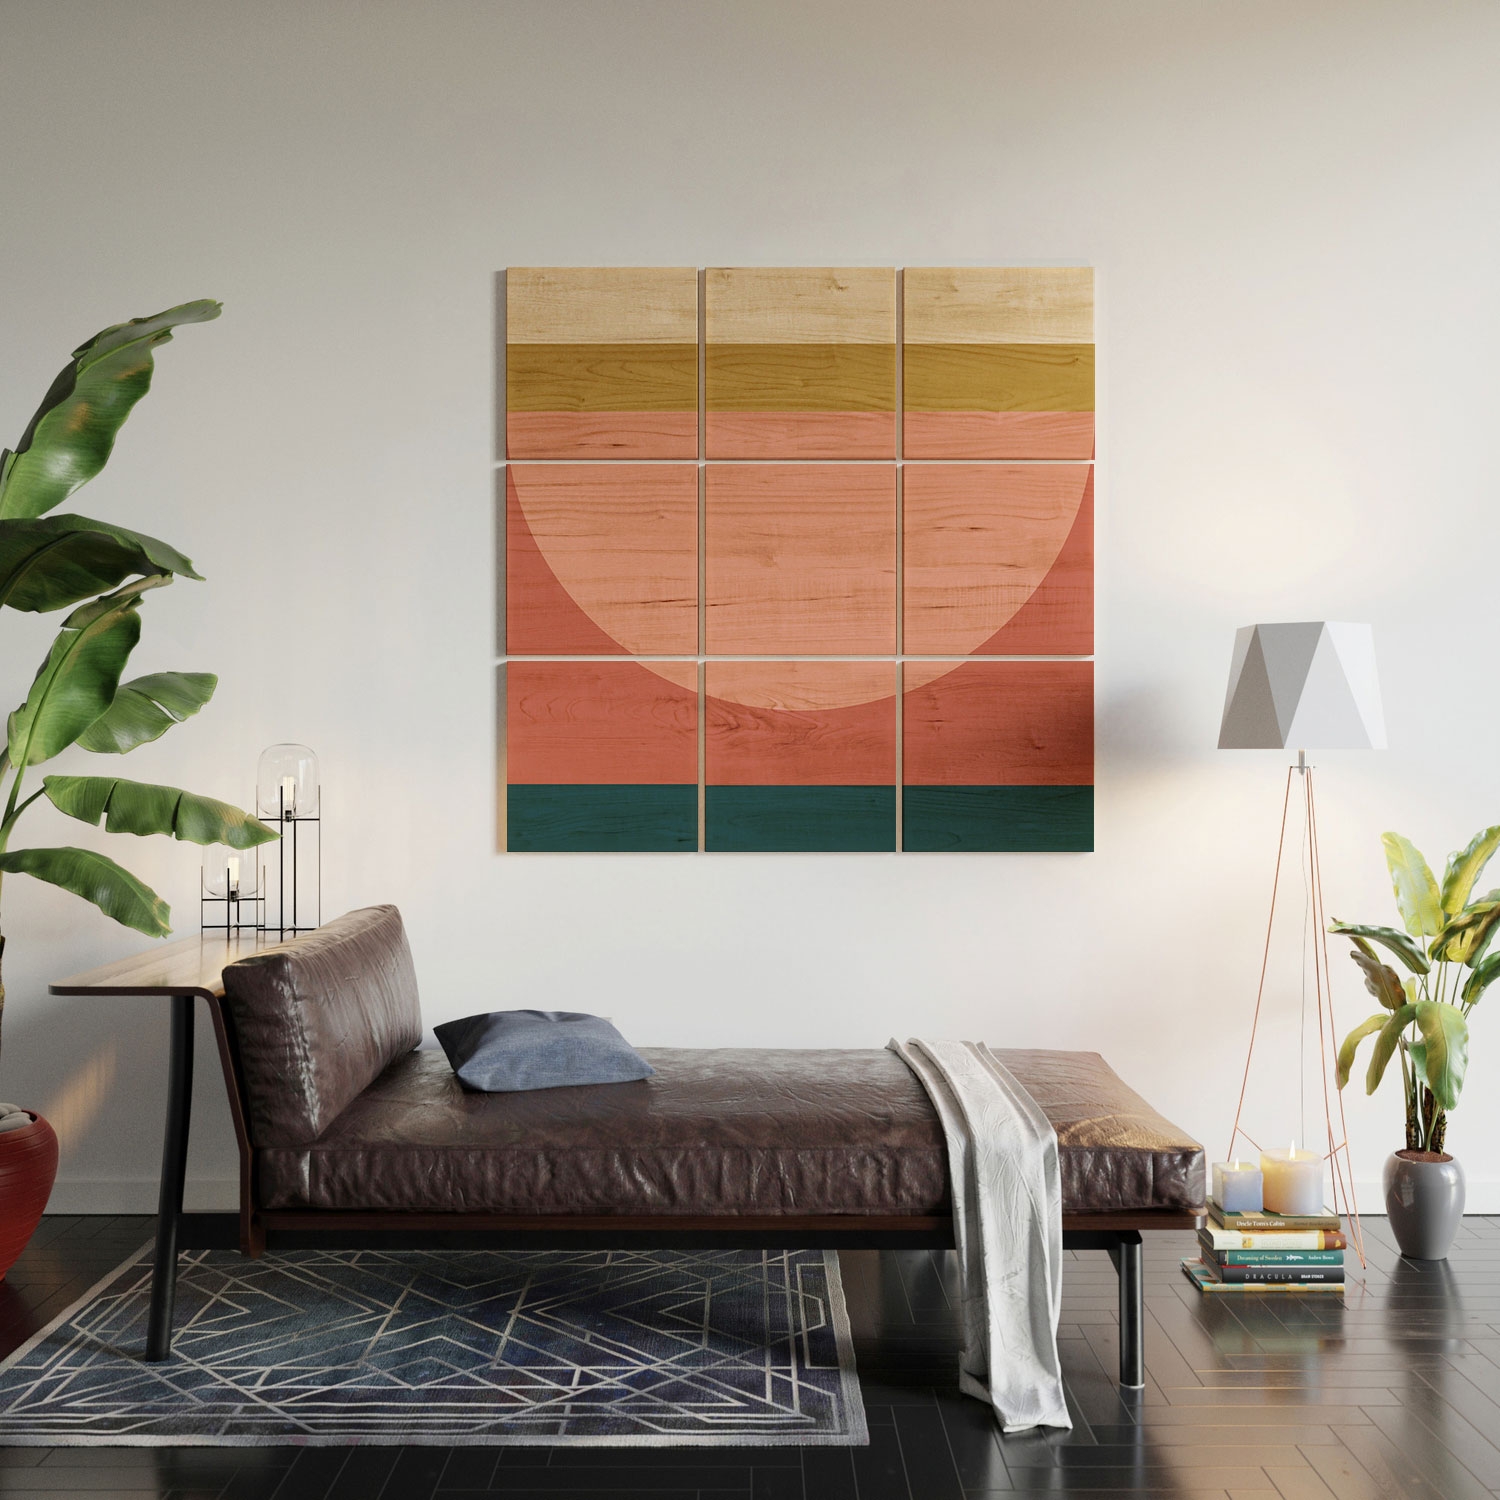 Maximalist Geometric 03 by The Old Art Studio - Wood Wall Mural3' X 3' (Nine 12" Wood Squares) - Image 1